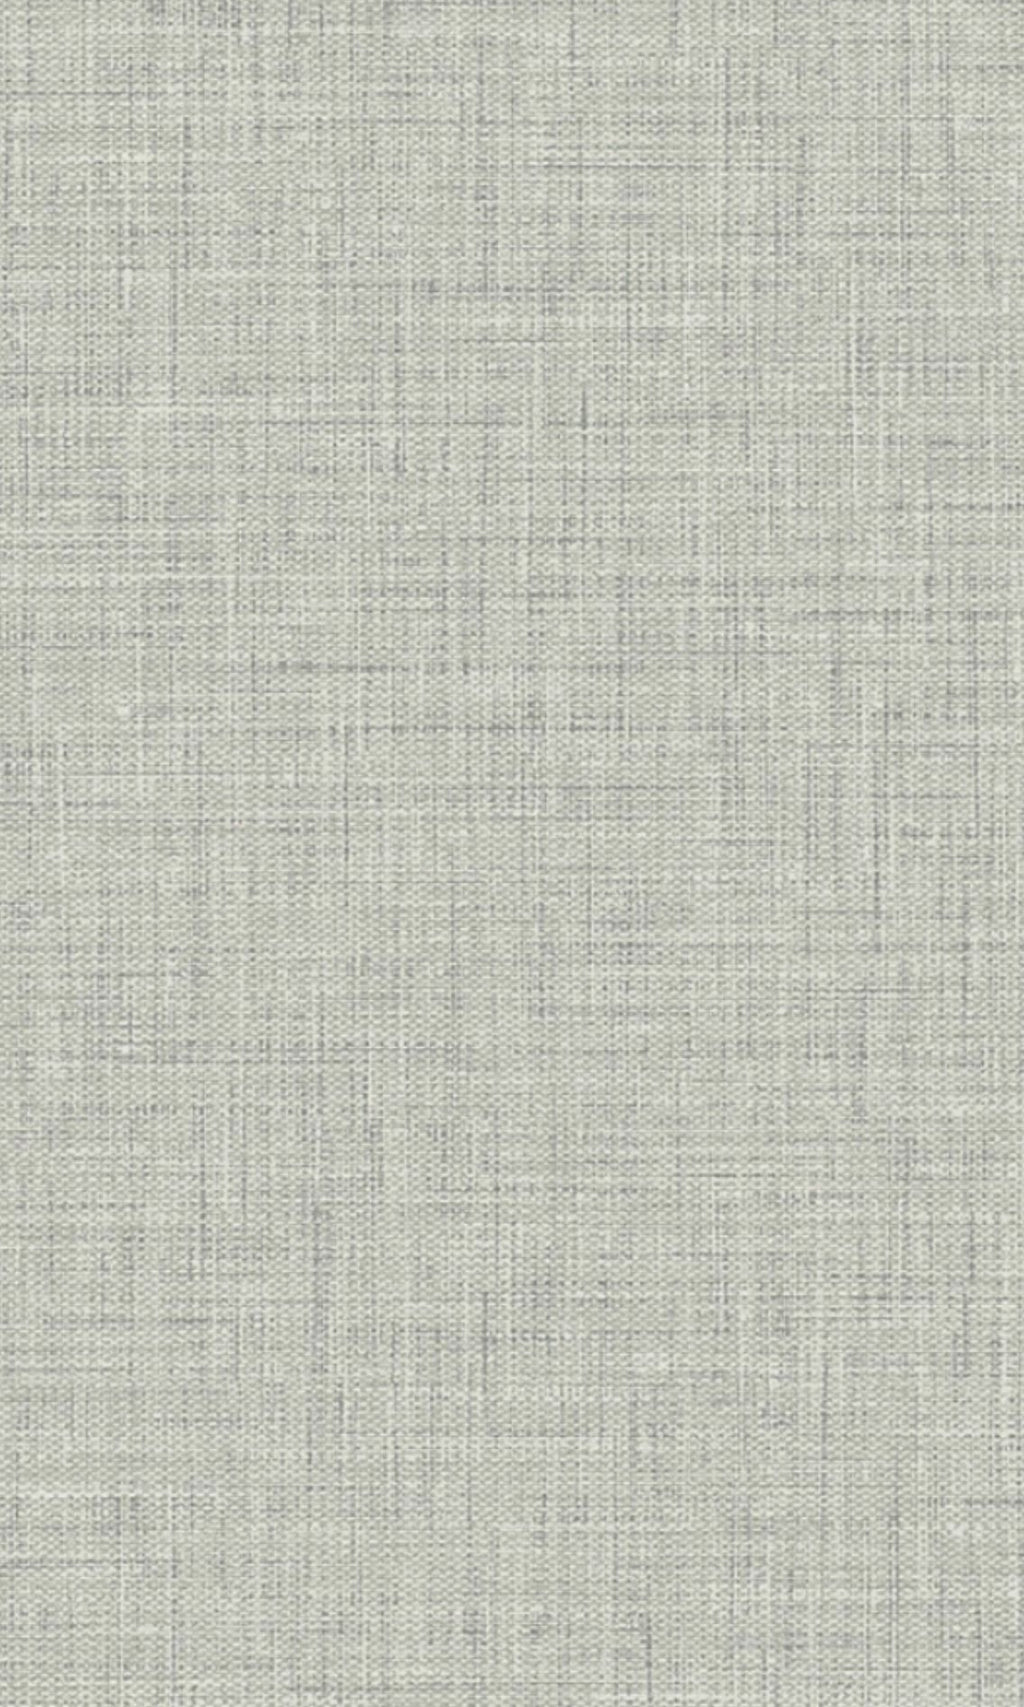 Dove Grey Fabric Like Textured Vinyl Commercial CPW1050